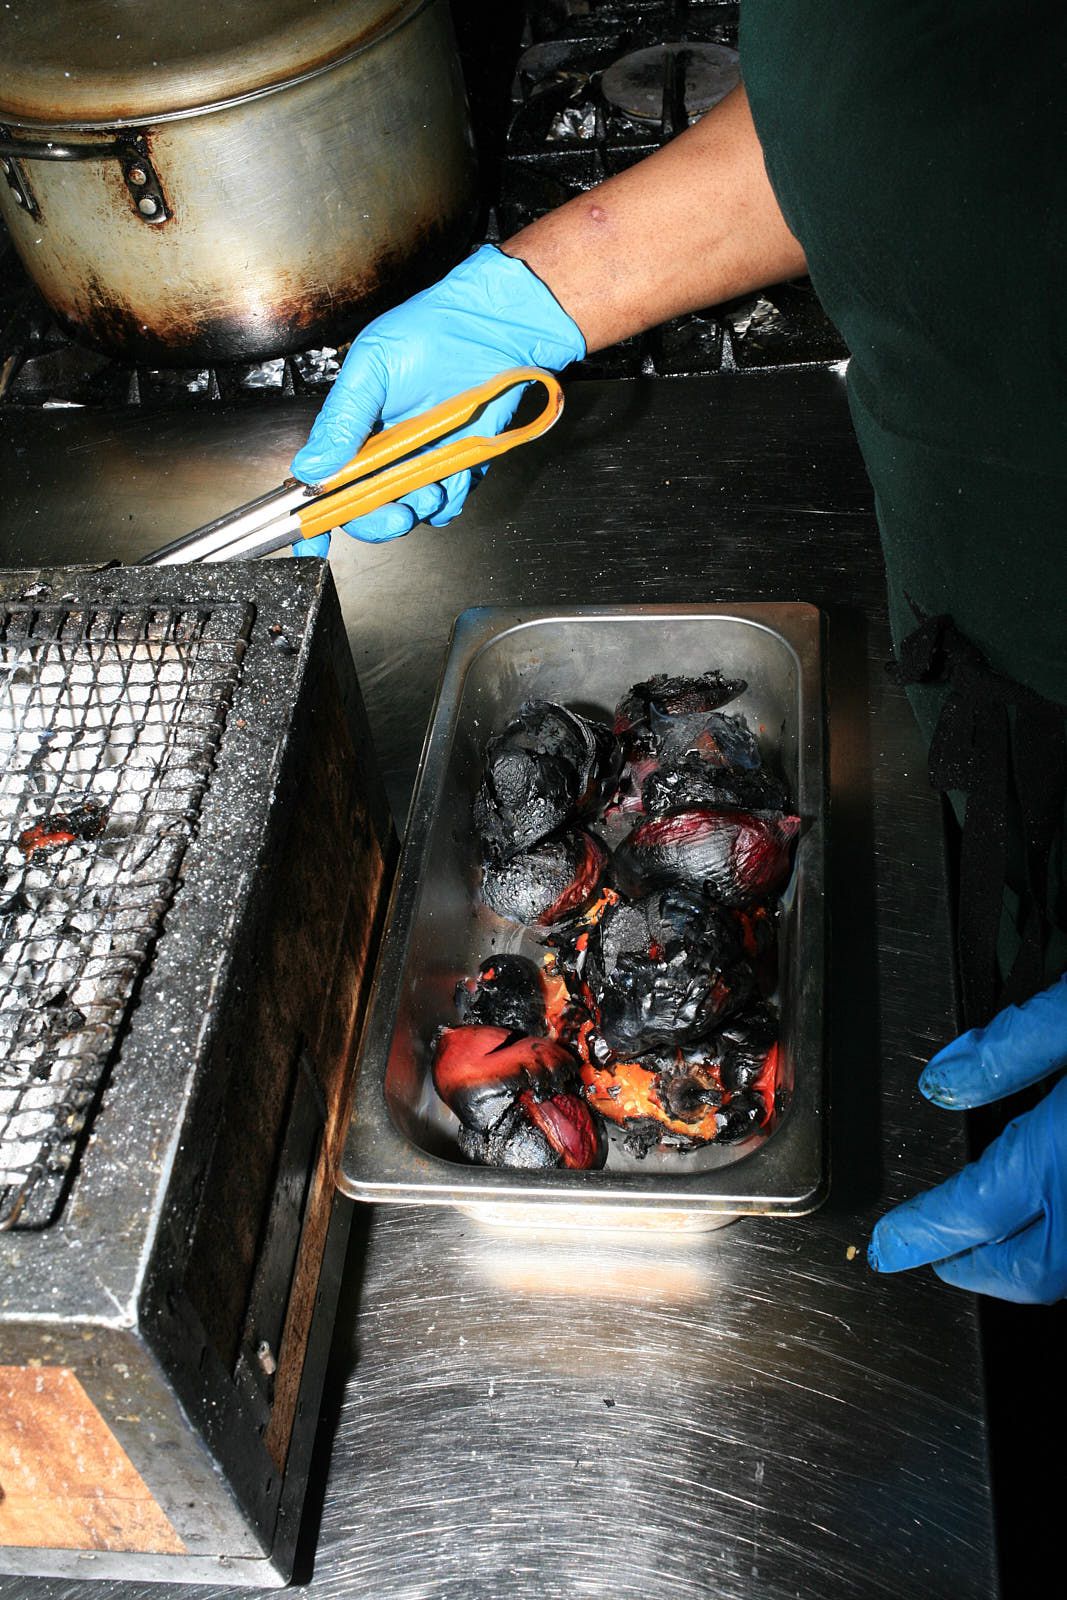 A gastro tray full of charred peppers, very blackened, next to a grill